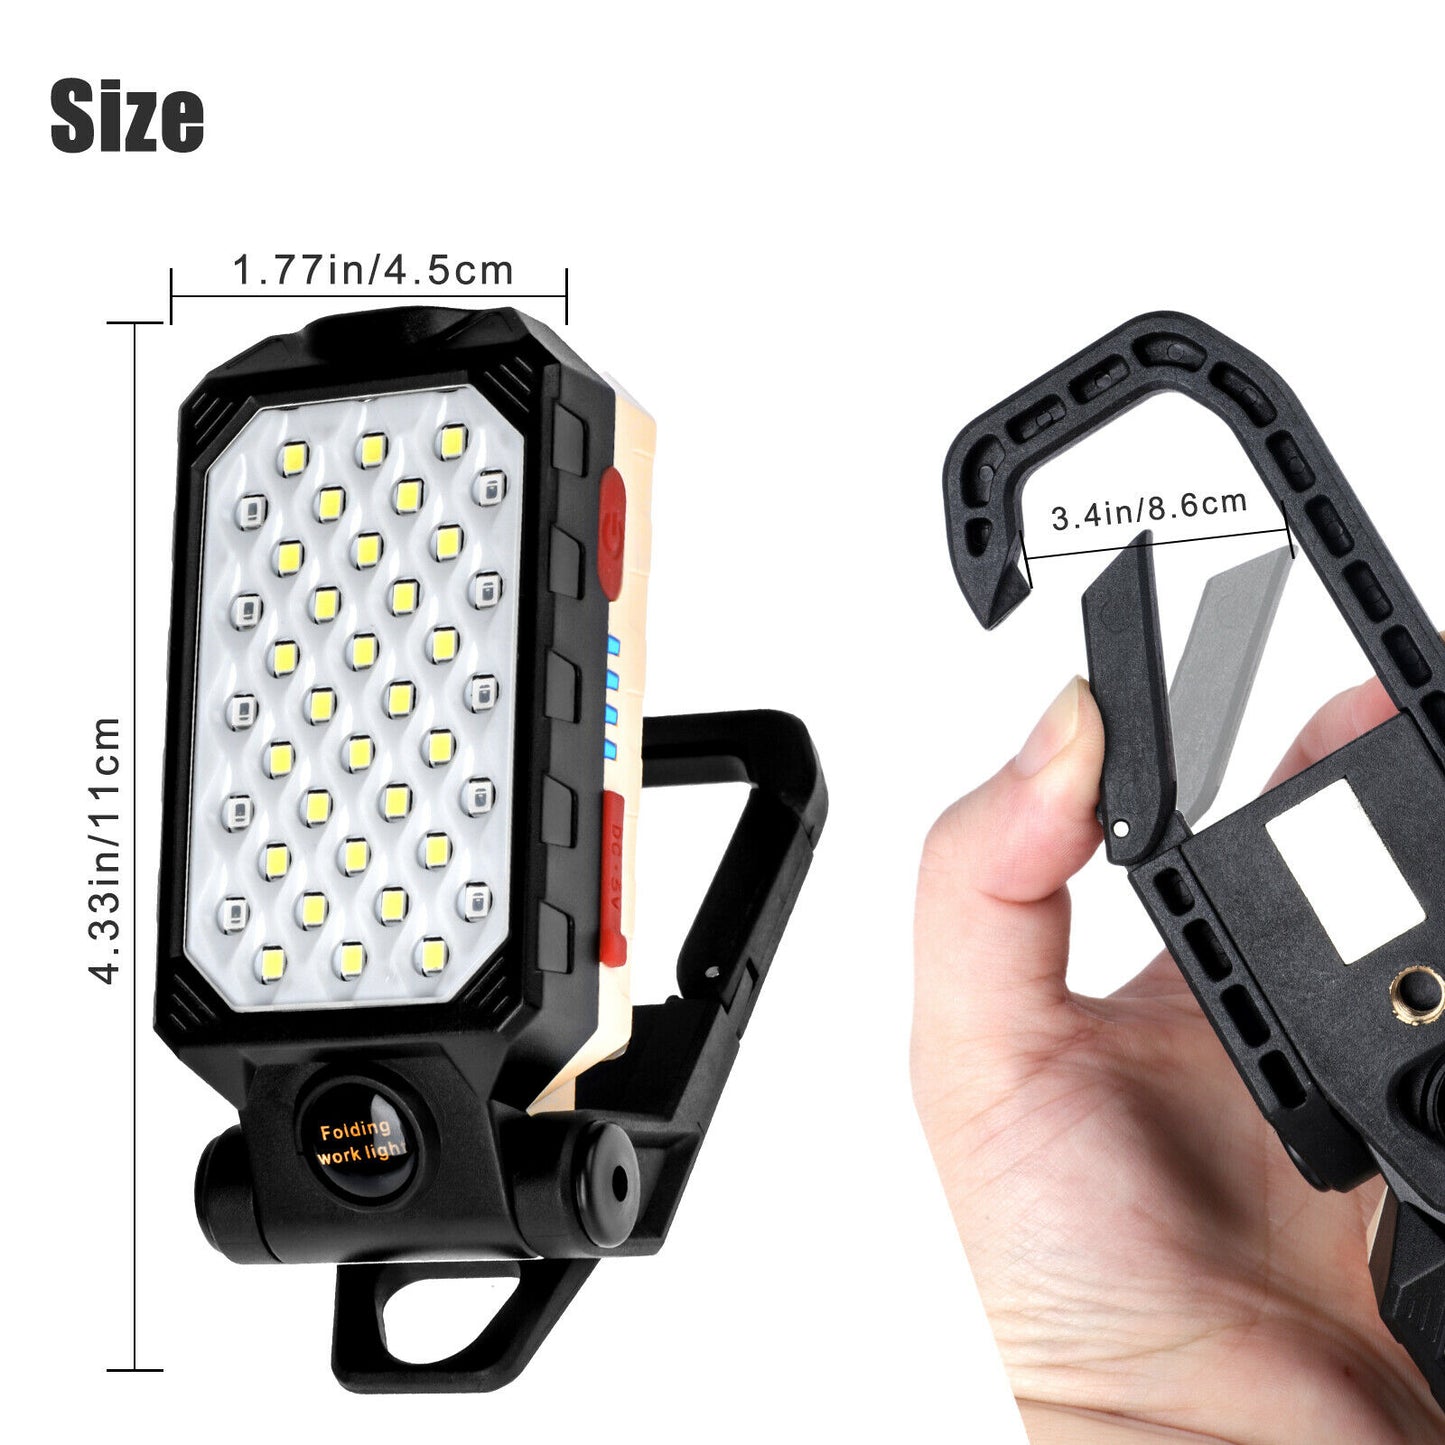 Magnetic COB LED Work Light USB Rechargeable Camping Lamp Torch Flashlight + Hook